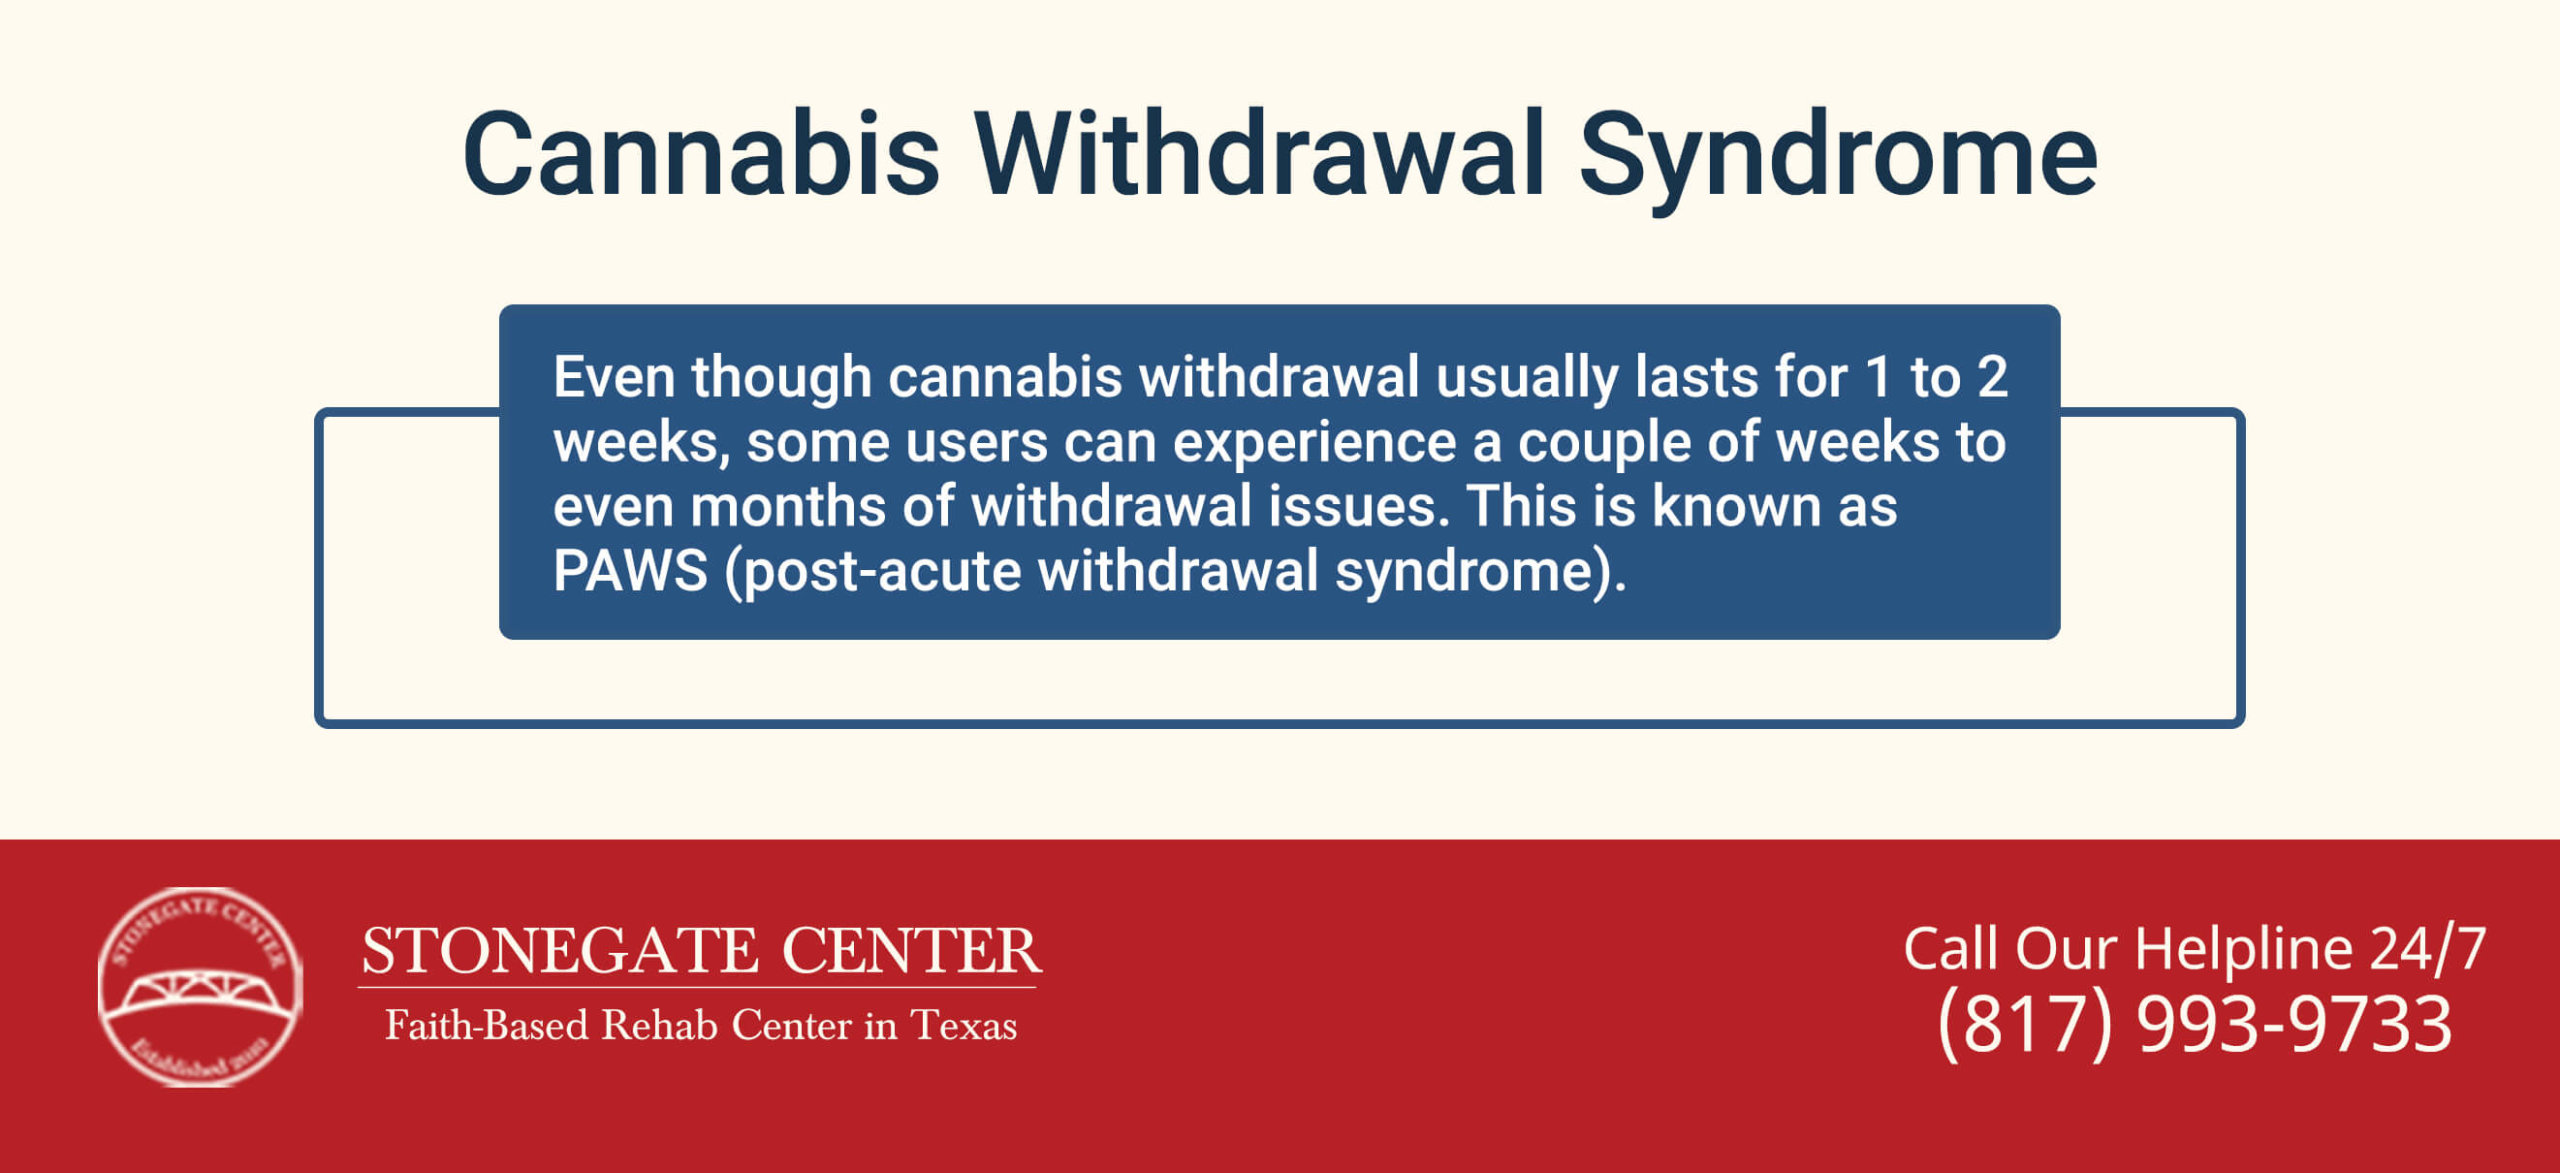 Stonegate Center Blog - How to Quit Smoking Weed - Cannabis Withdrawal Syndrome Infographics